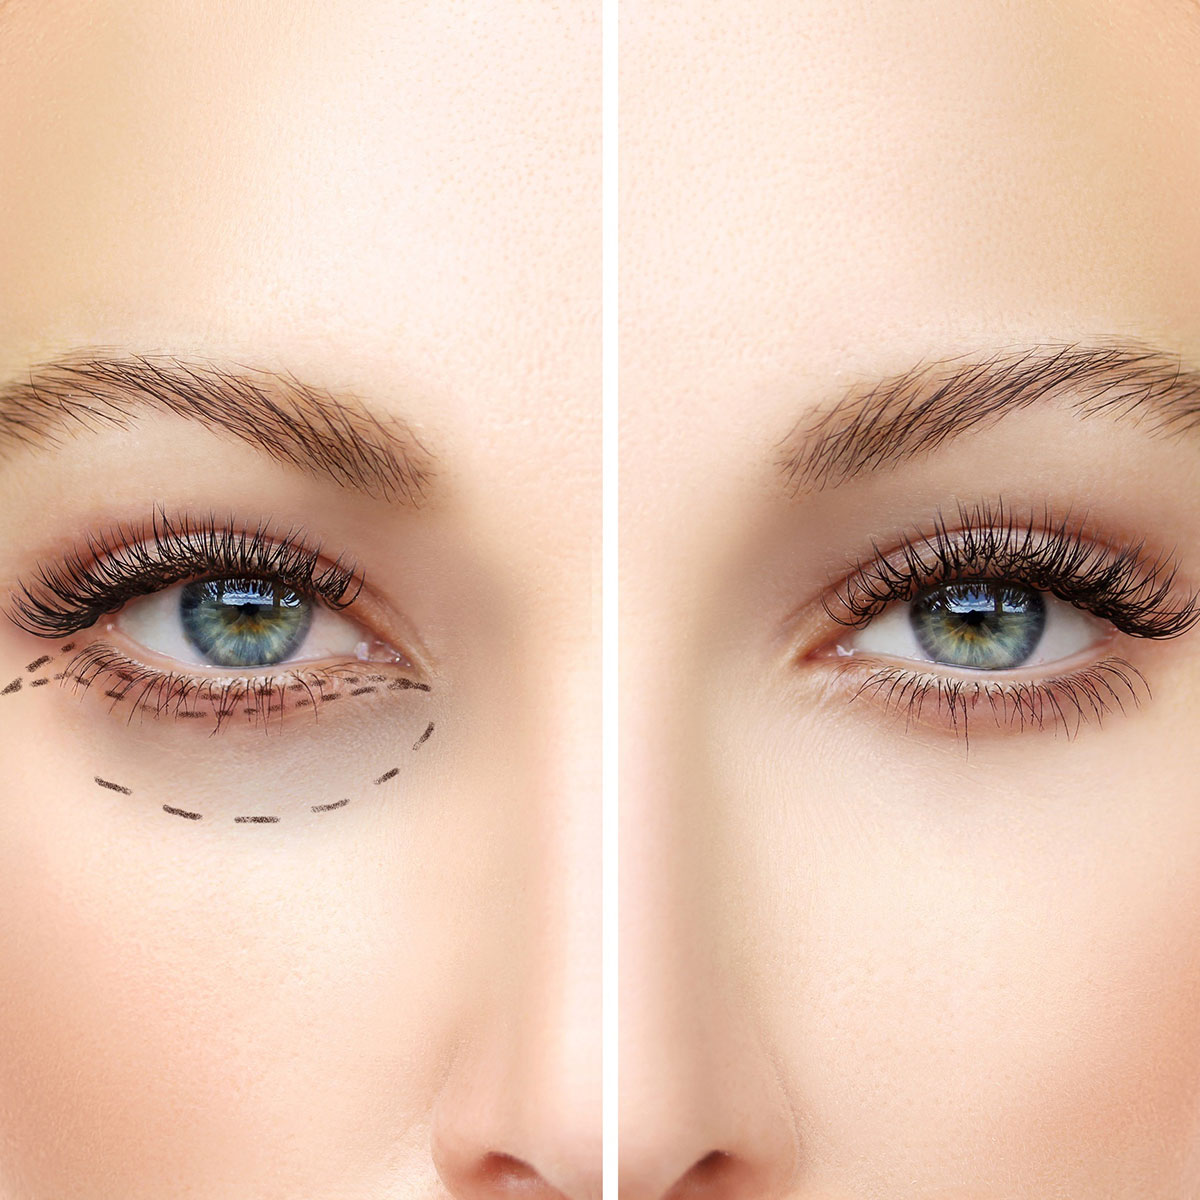 what helps droopy eyelids after botox